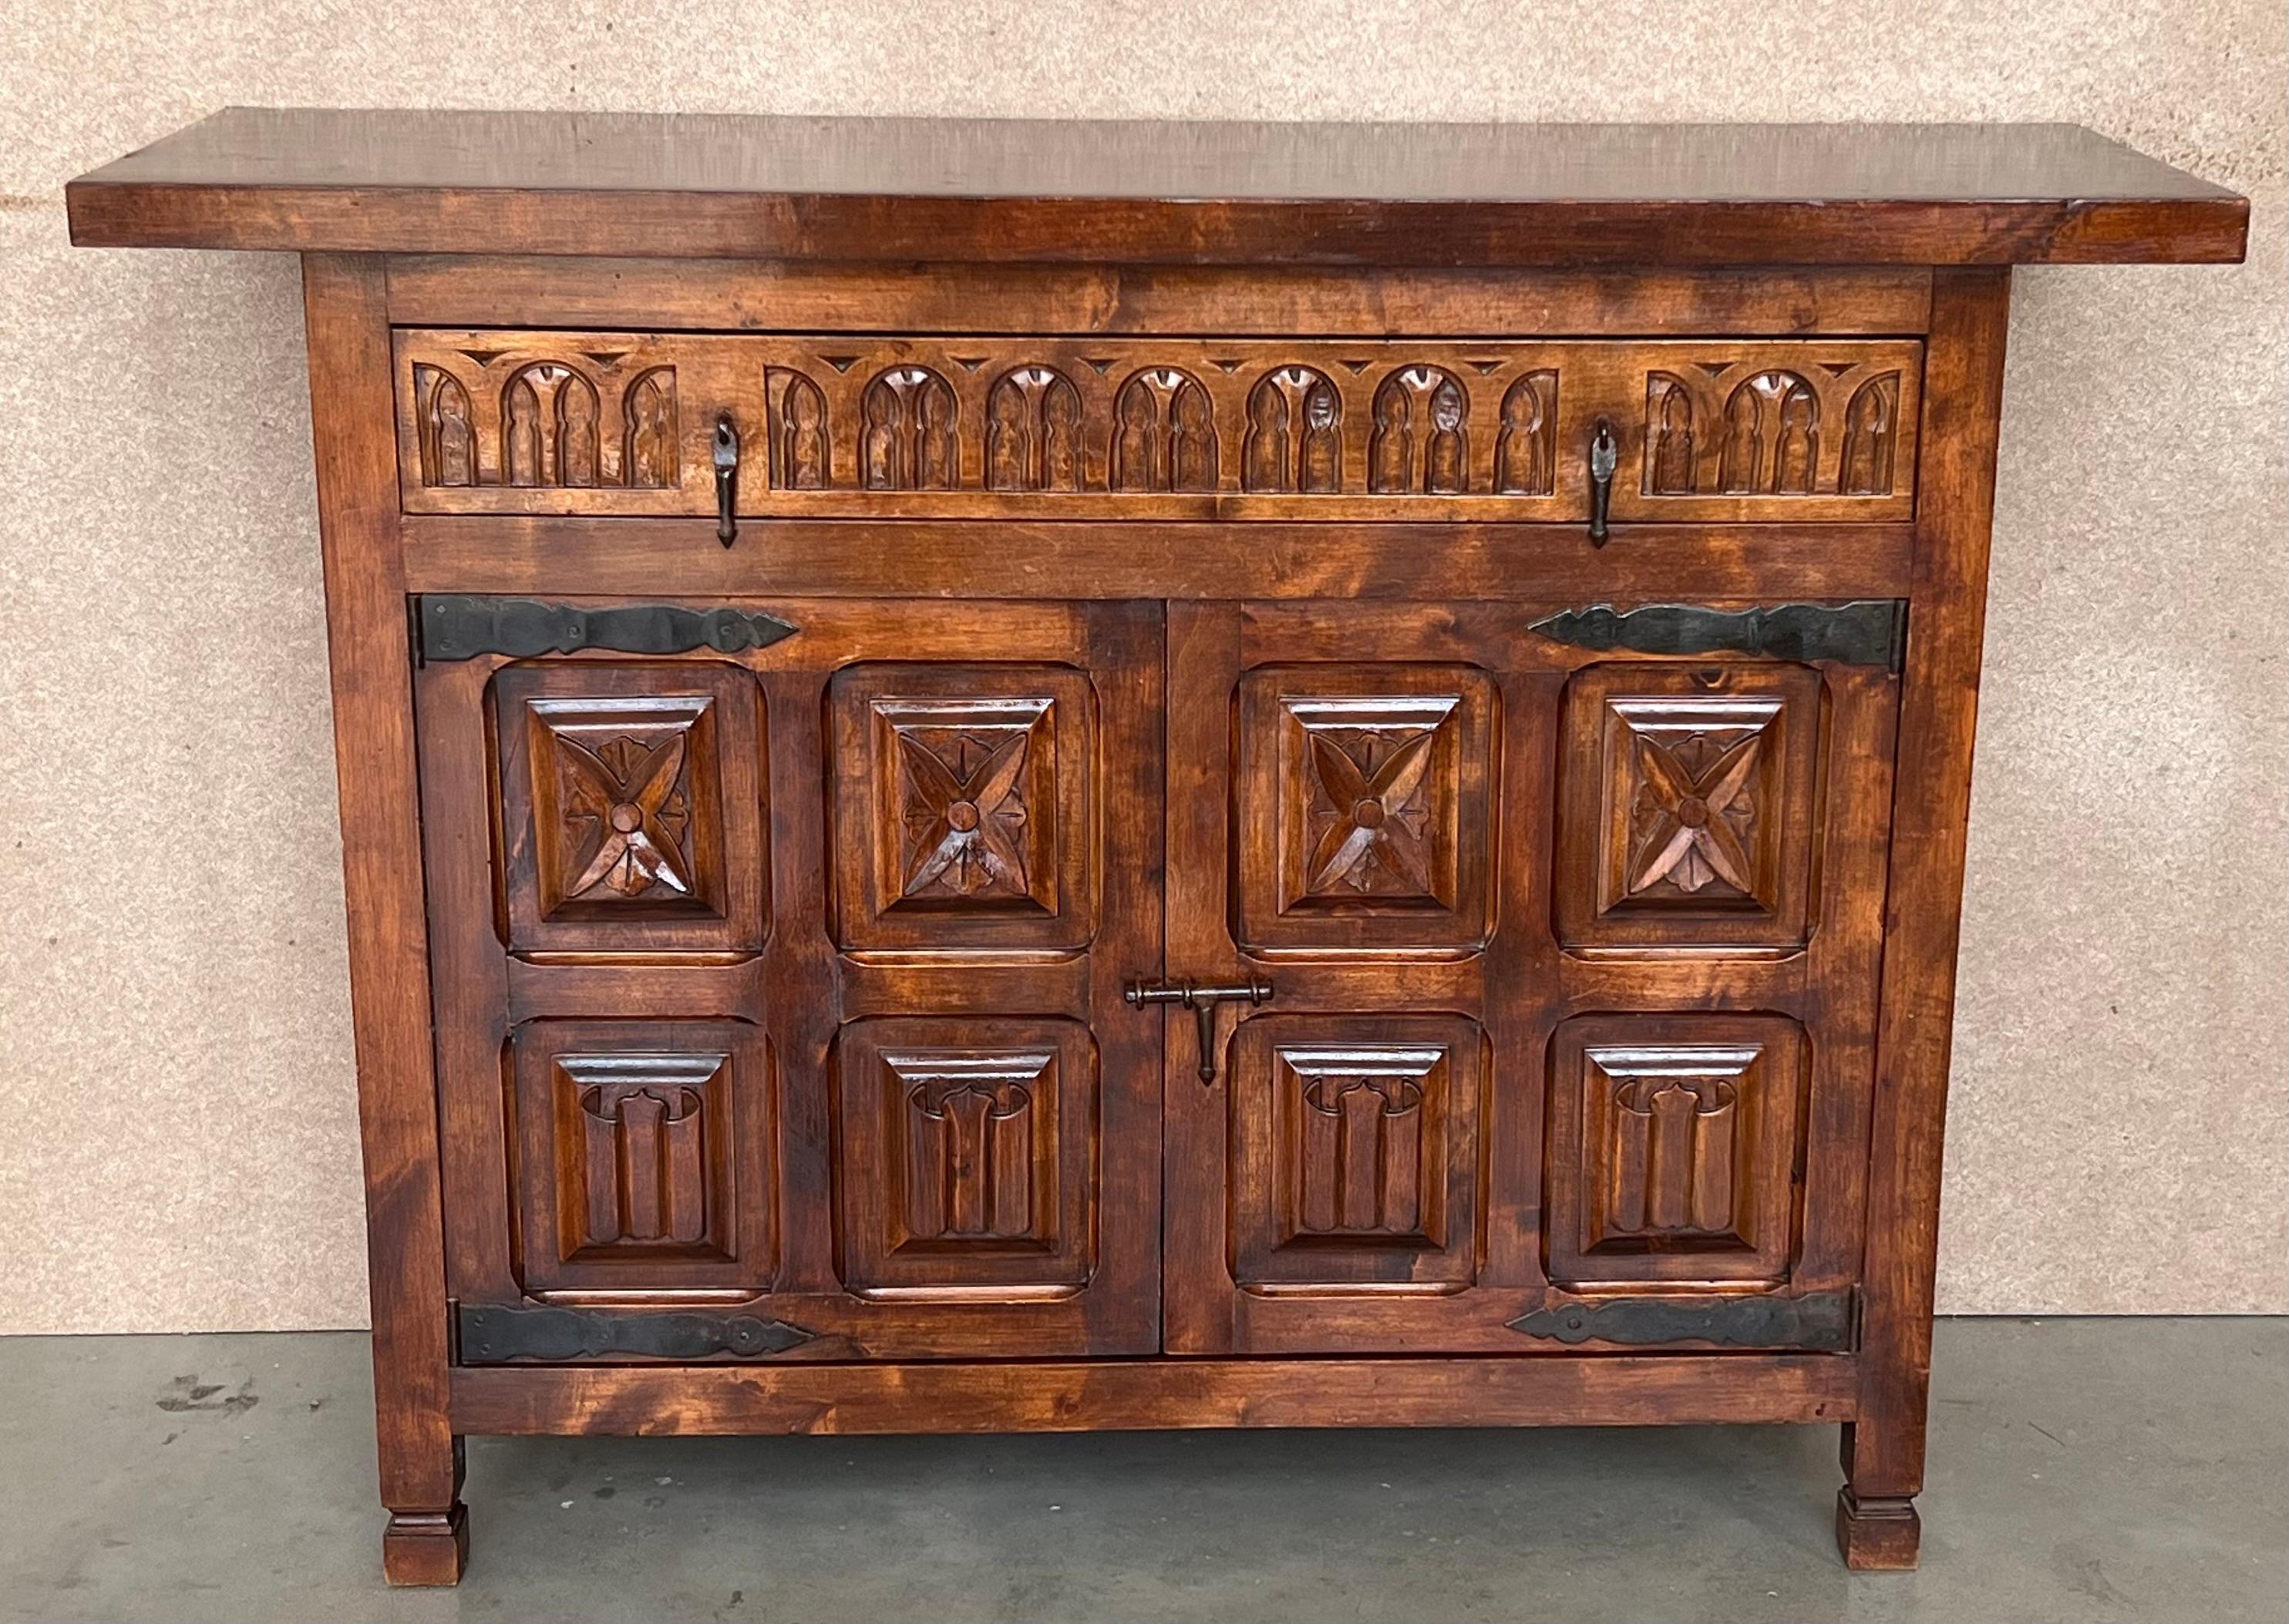 Spanish Colonial 20th Century Spanish Carved Walnut Tuscan Credenza or Buffet with One-Drawer For Sale